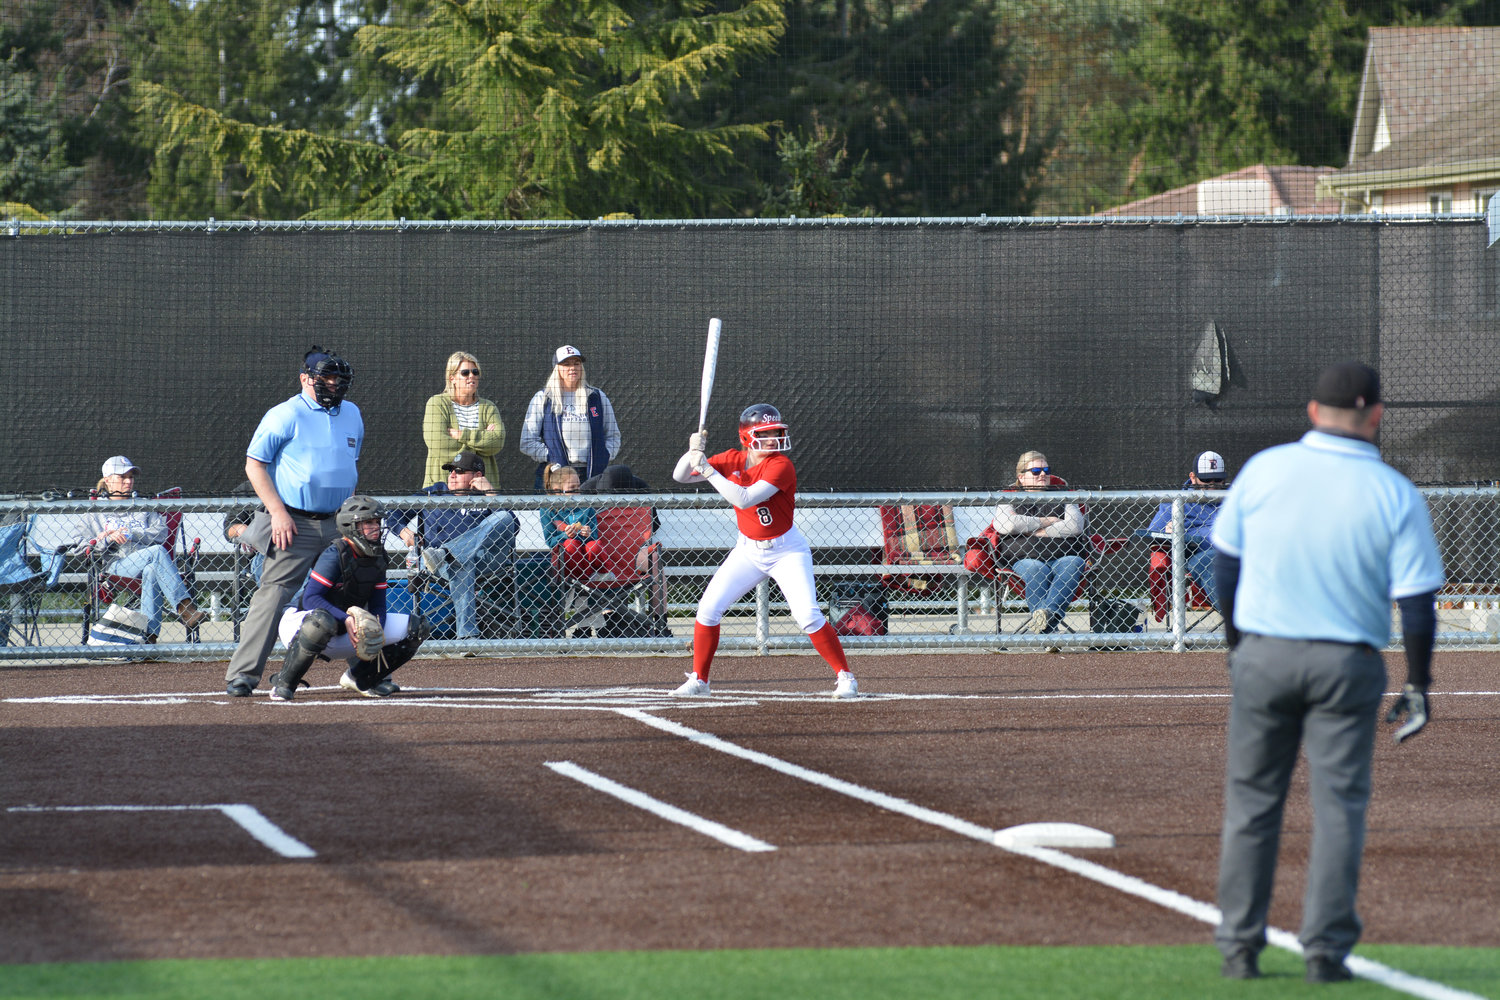 Third basebman Ashlyn Aven during an at-bat on Friday, March 25 at Bellevue College.